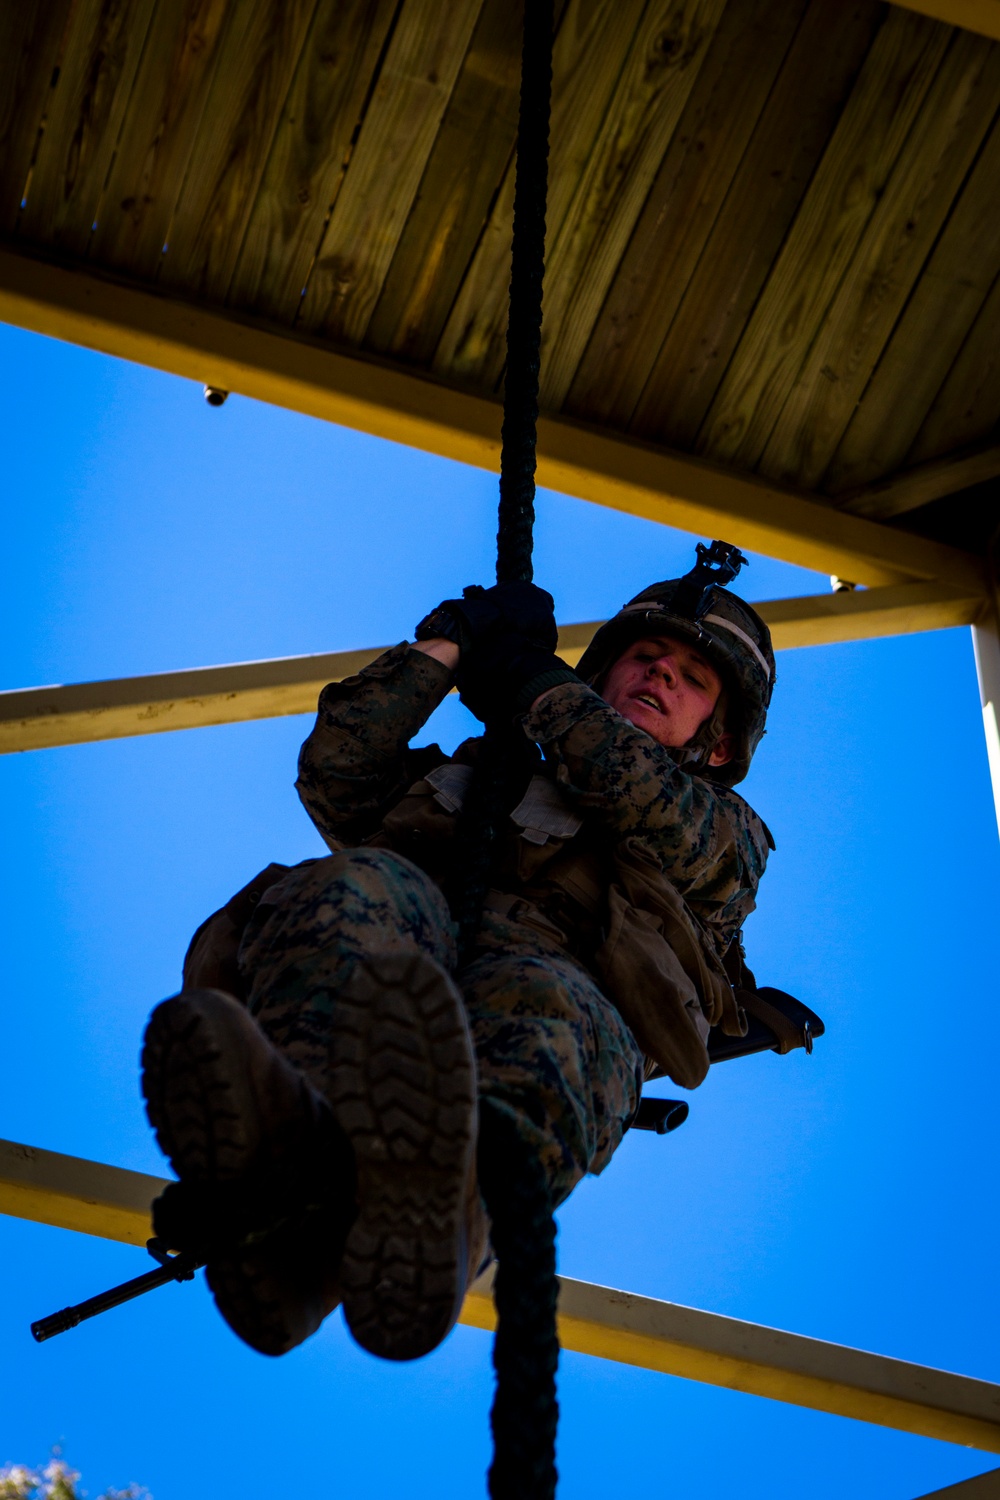 Crisis Response Marines complete fast-rope training in Spain